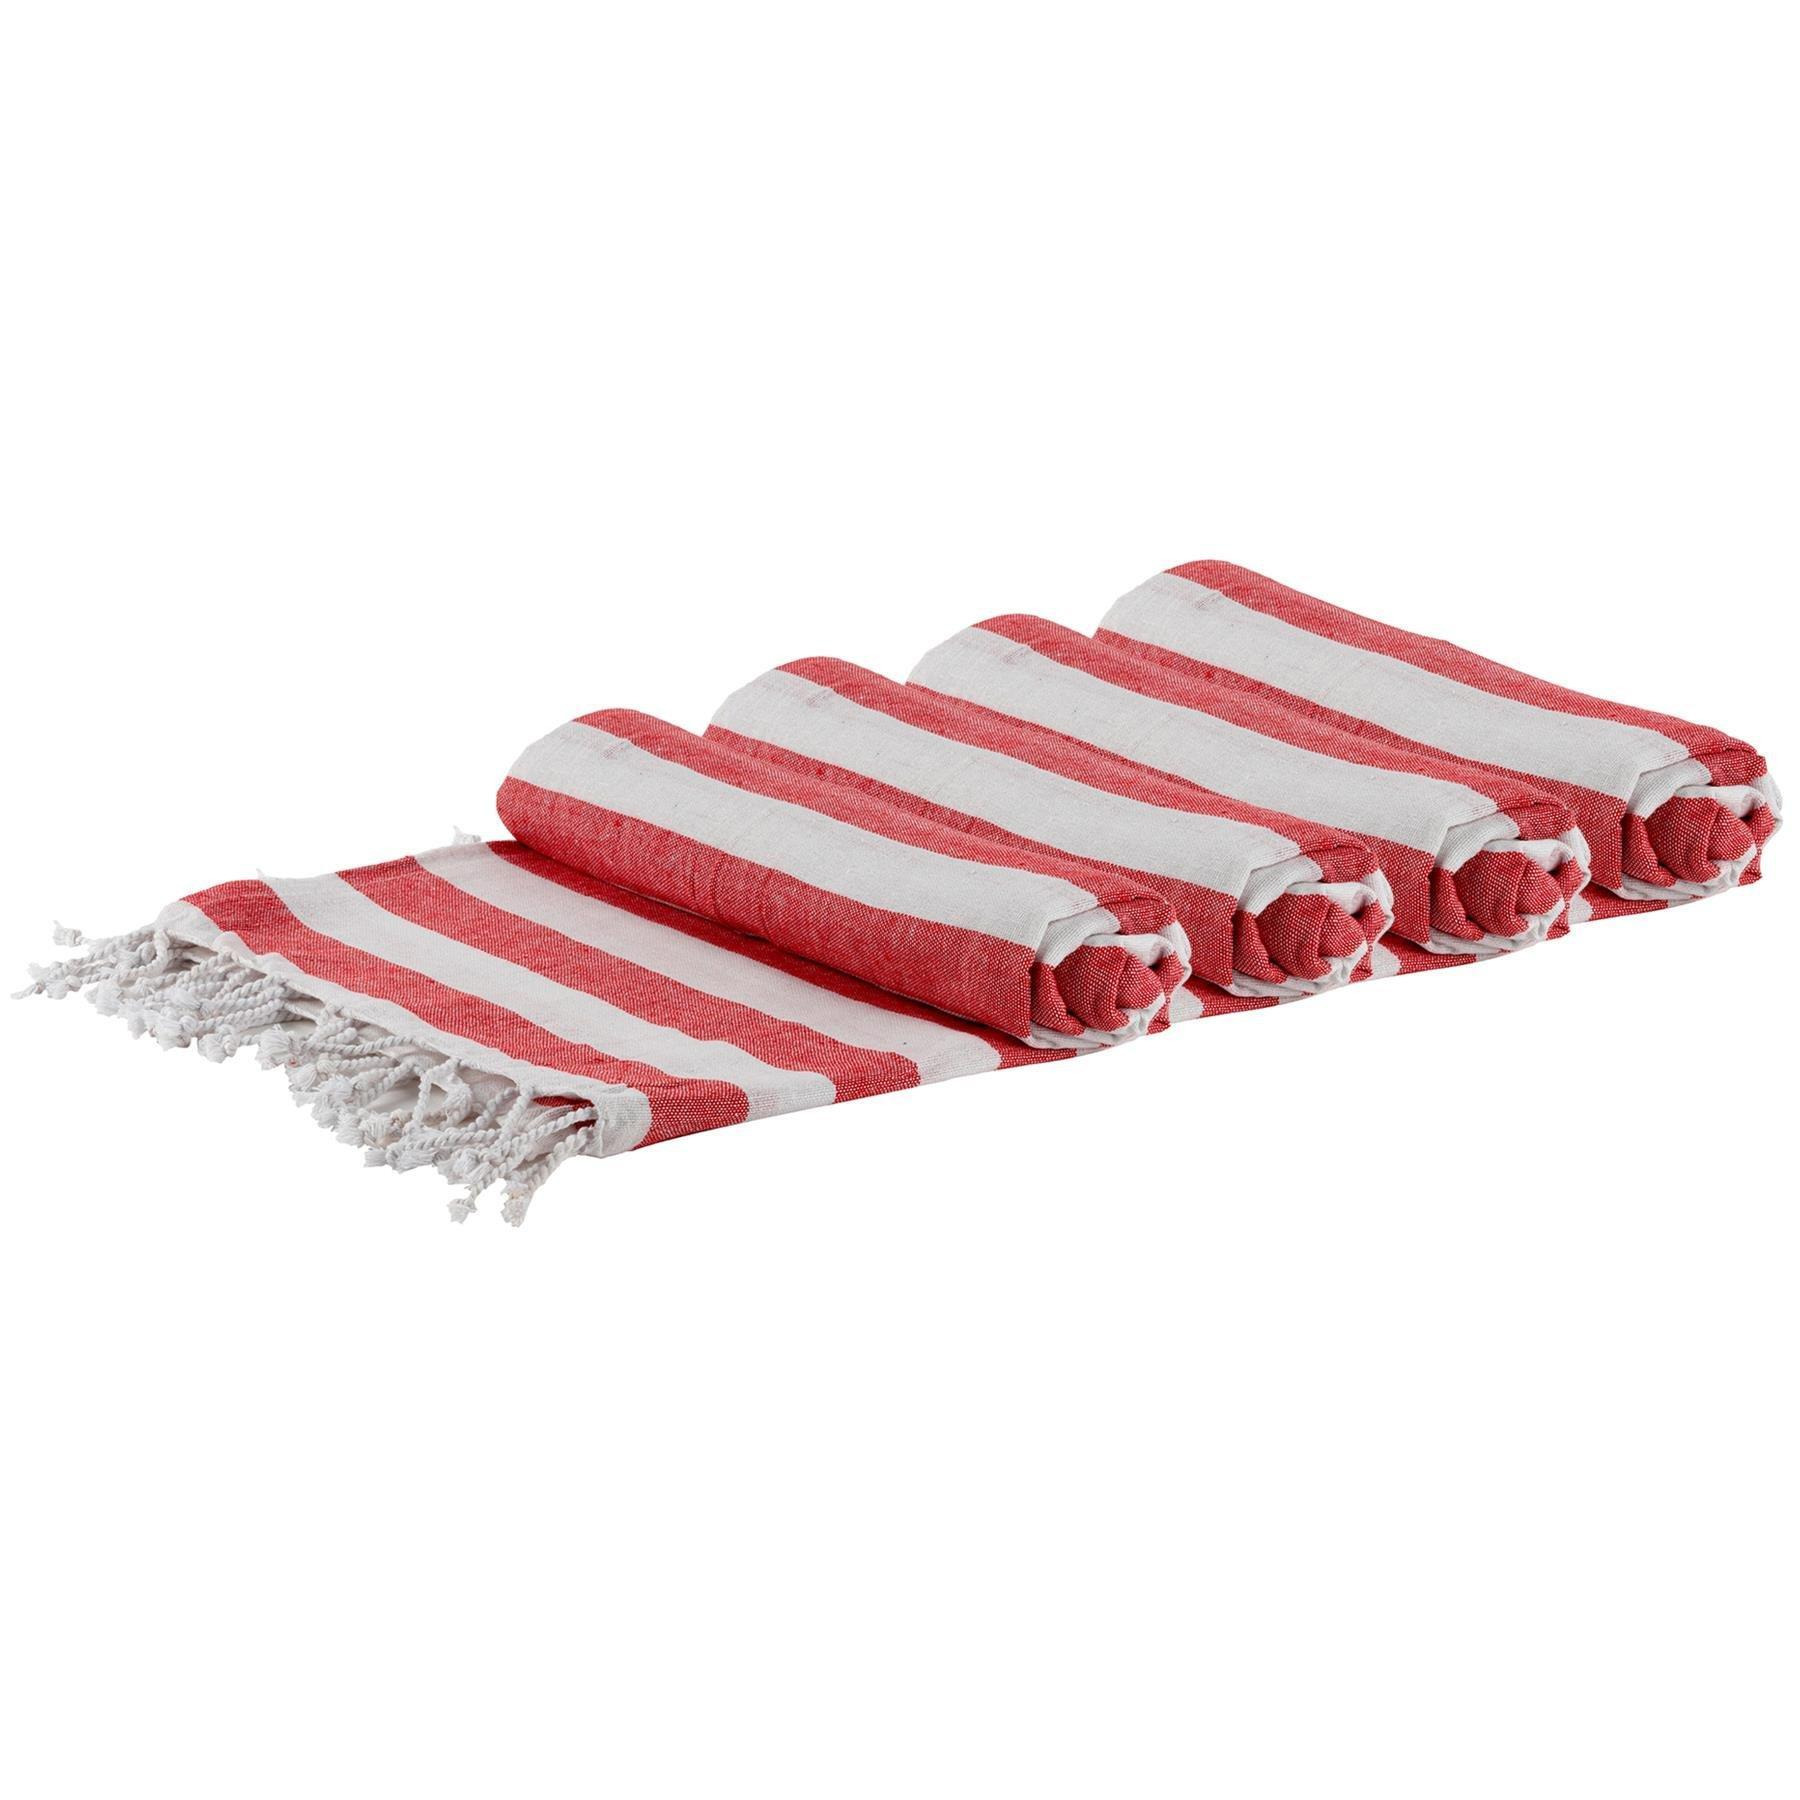 Turkish Cotton Bath Towels 170 x 90cm Red Stripe Pack of 4 - image 1